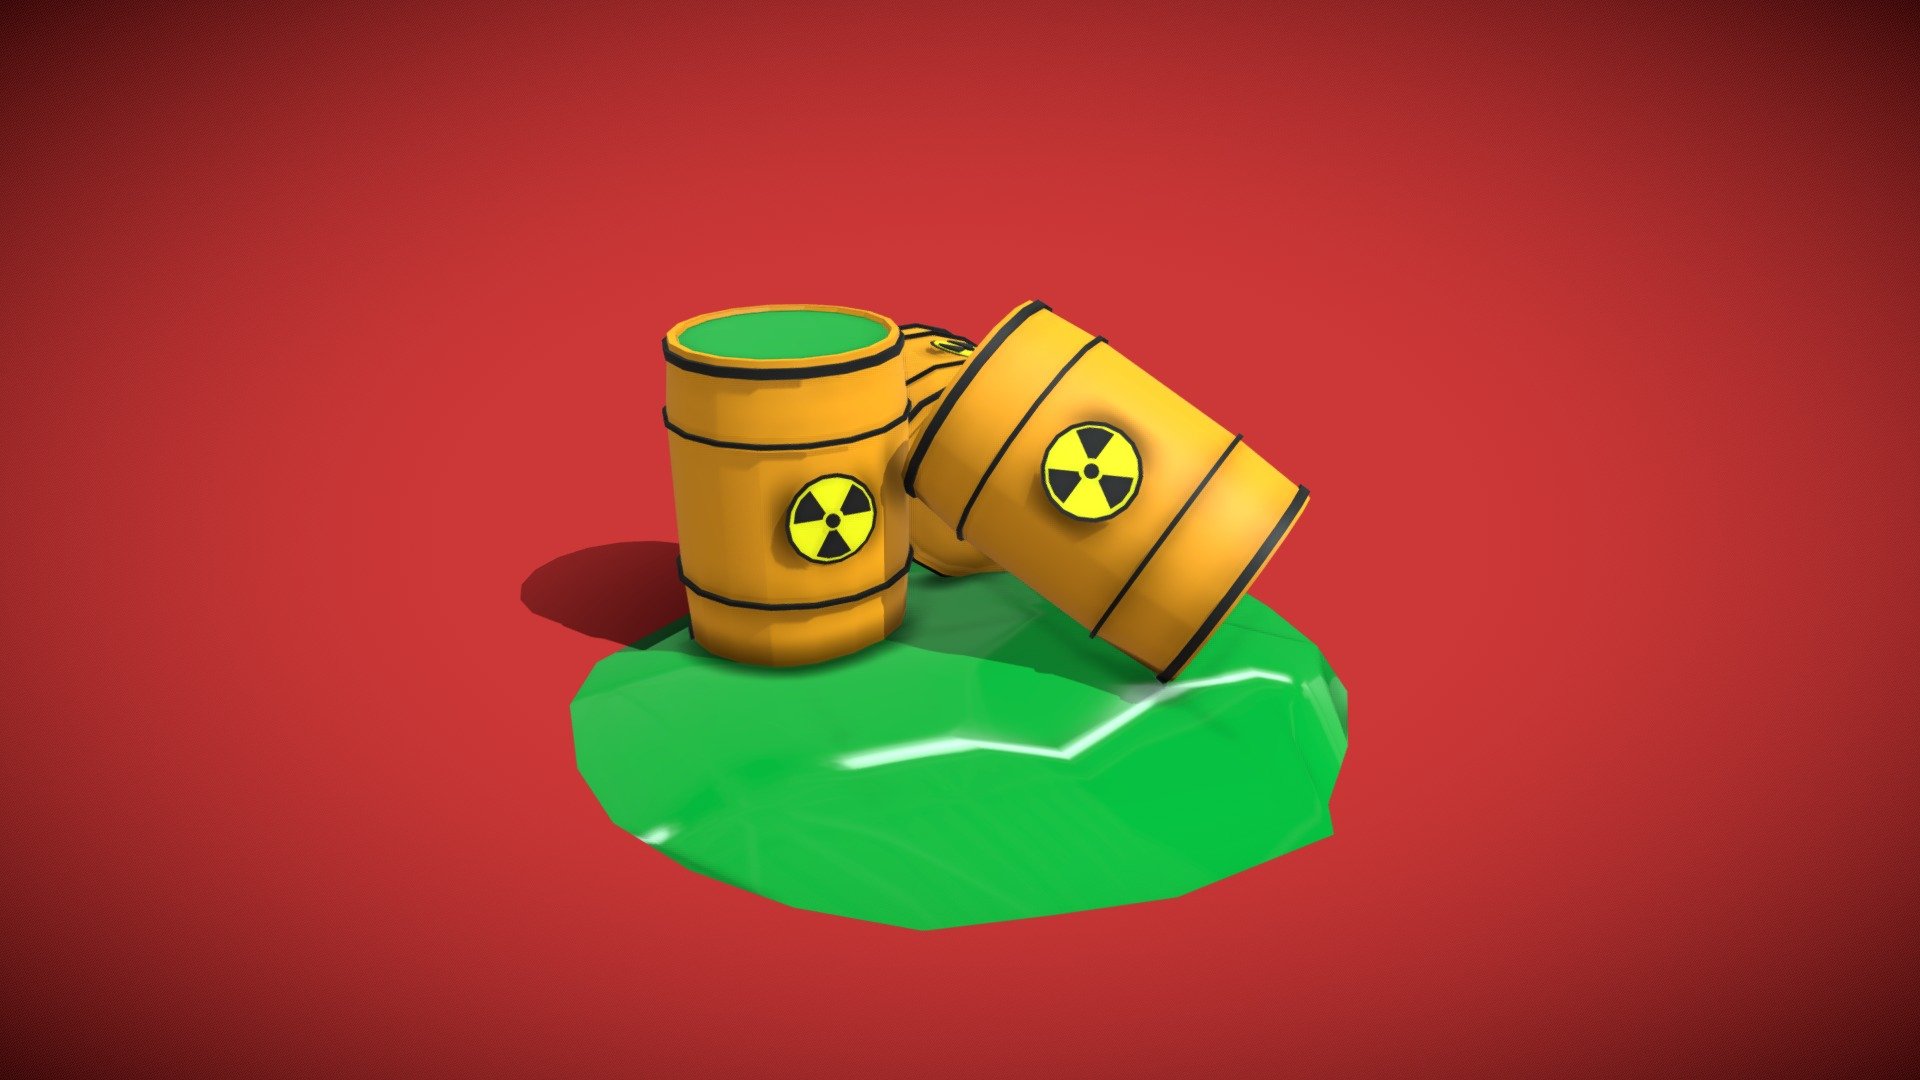 Day 2 3December!

Watch out for the green stuff!

Nuclear Barrel spillage!

Created in Maya 3d model